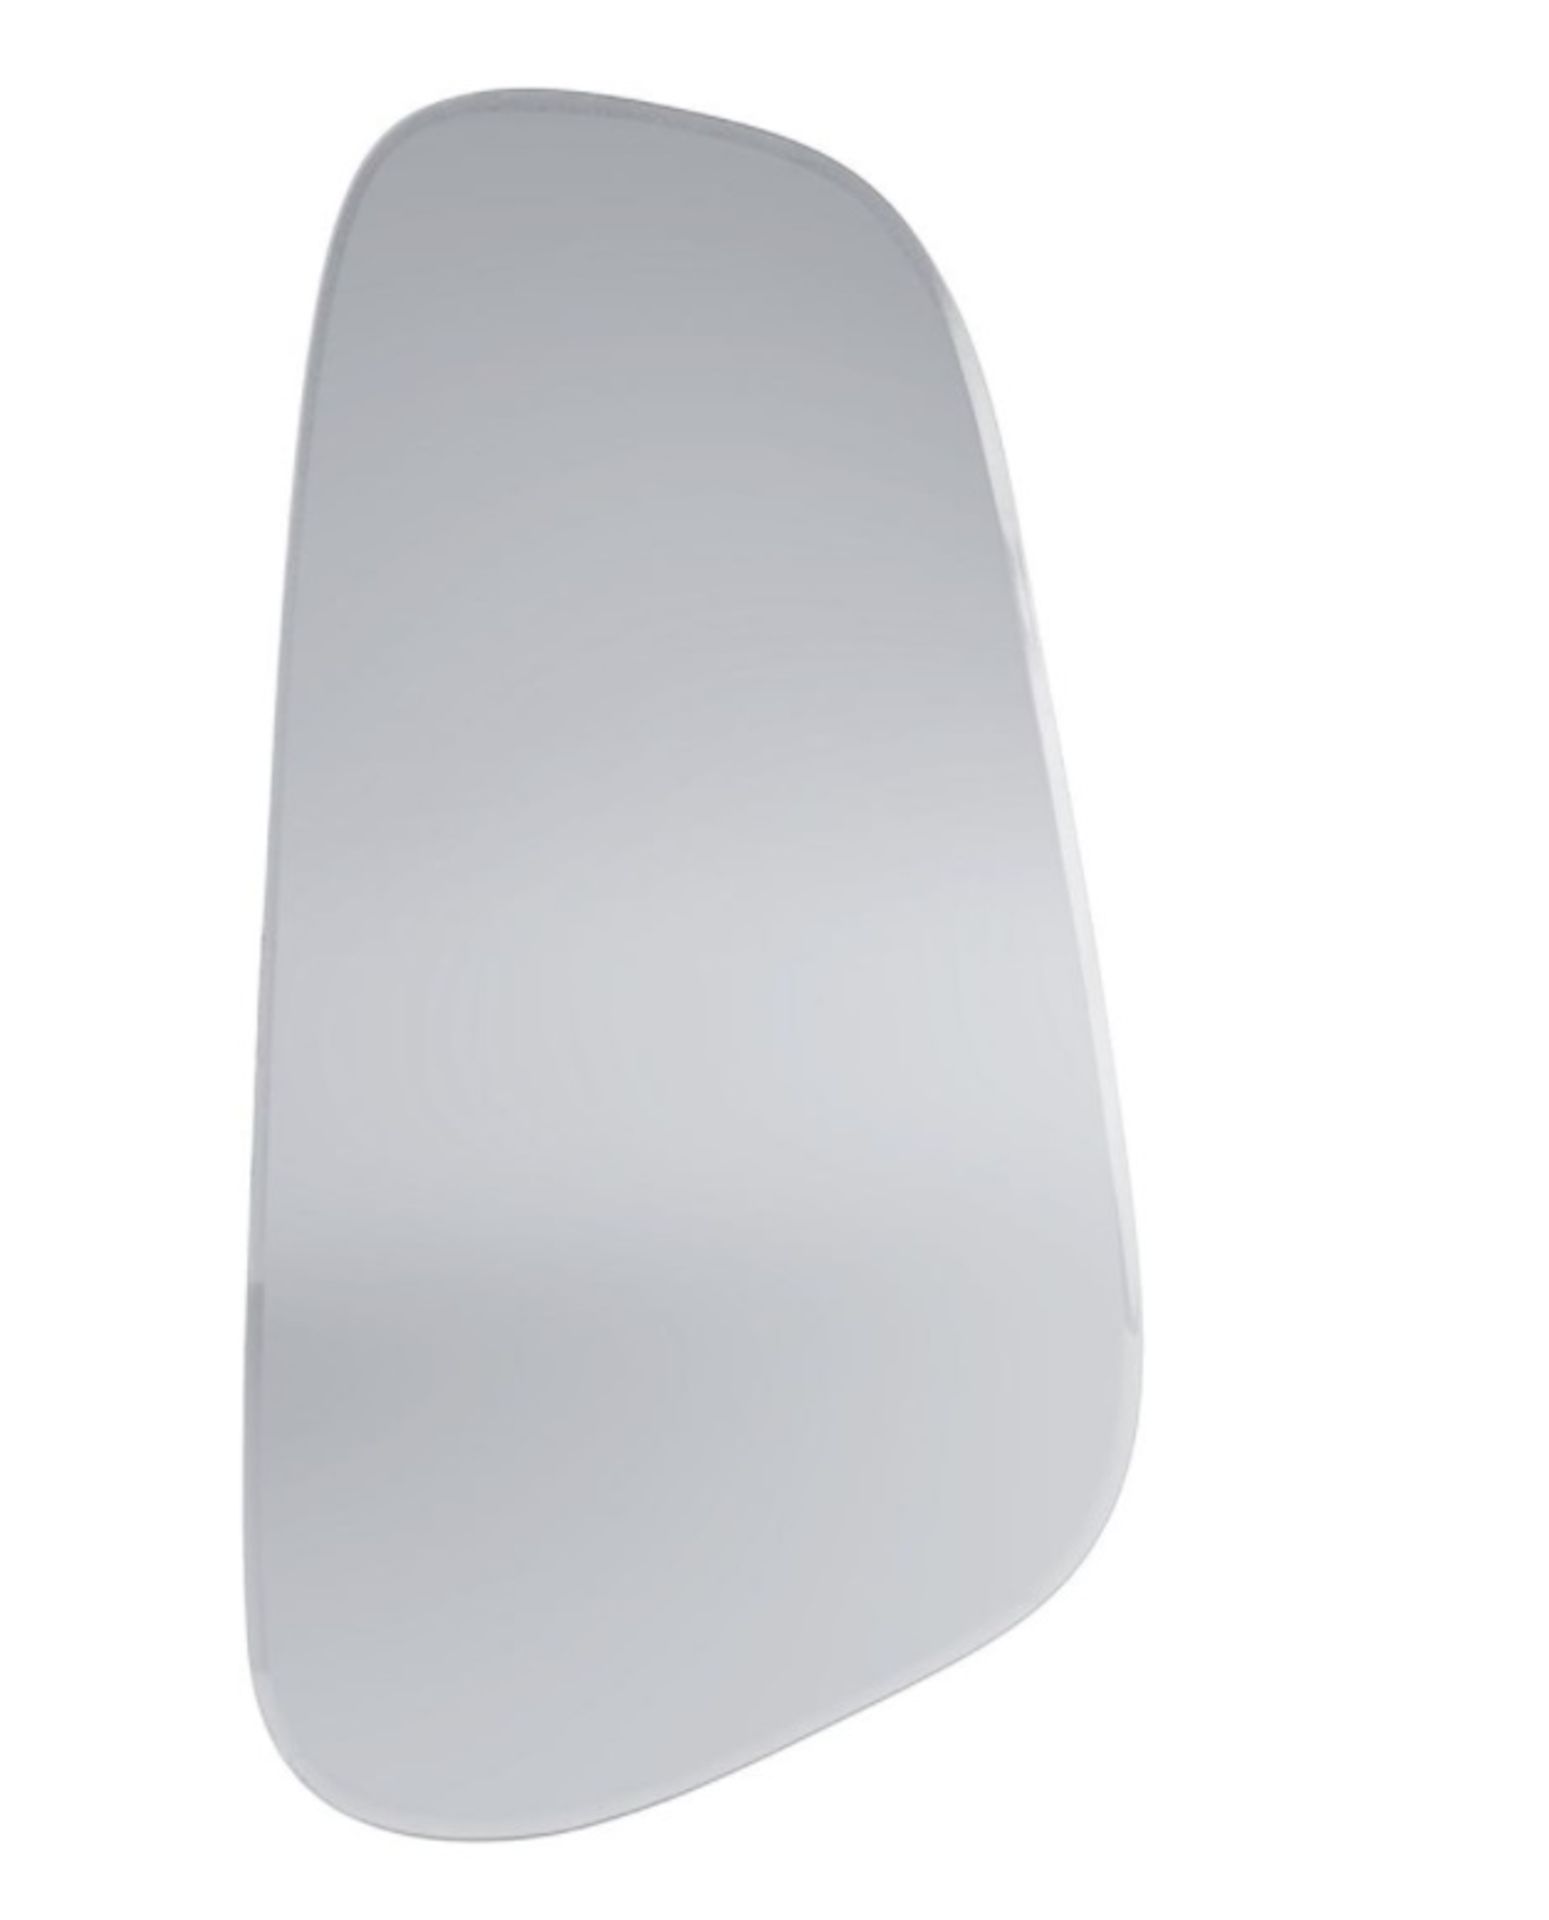 OUT OF BALANCE MIRROR SET OF 3 (SILVER) BY OLIVER BONAS - RRP £115 - Image 3 of 7